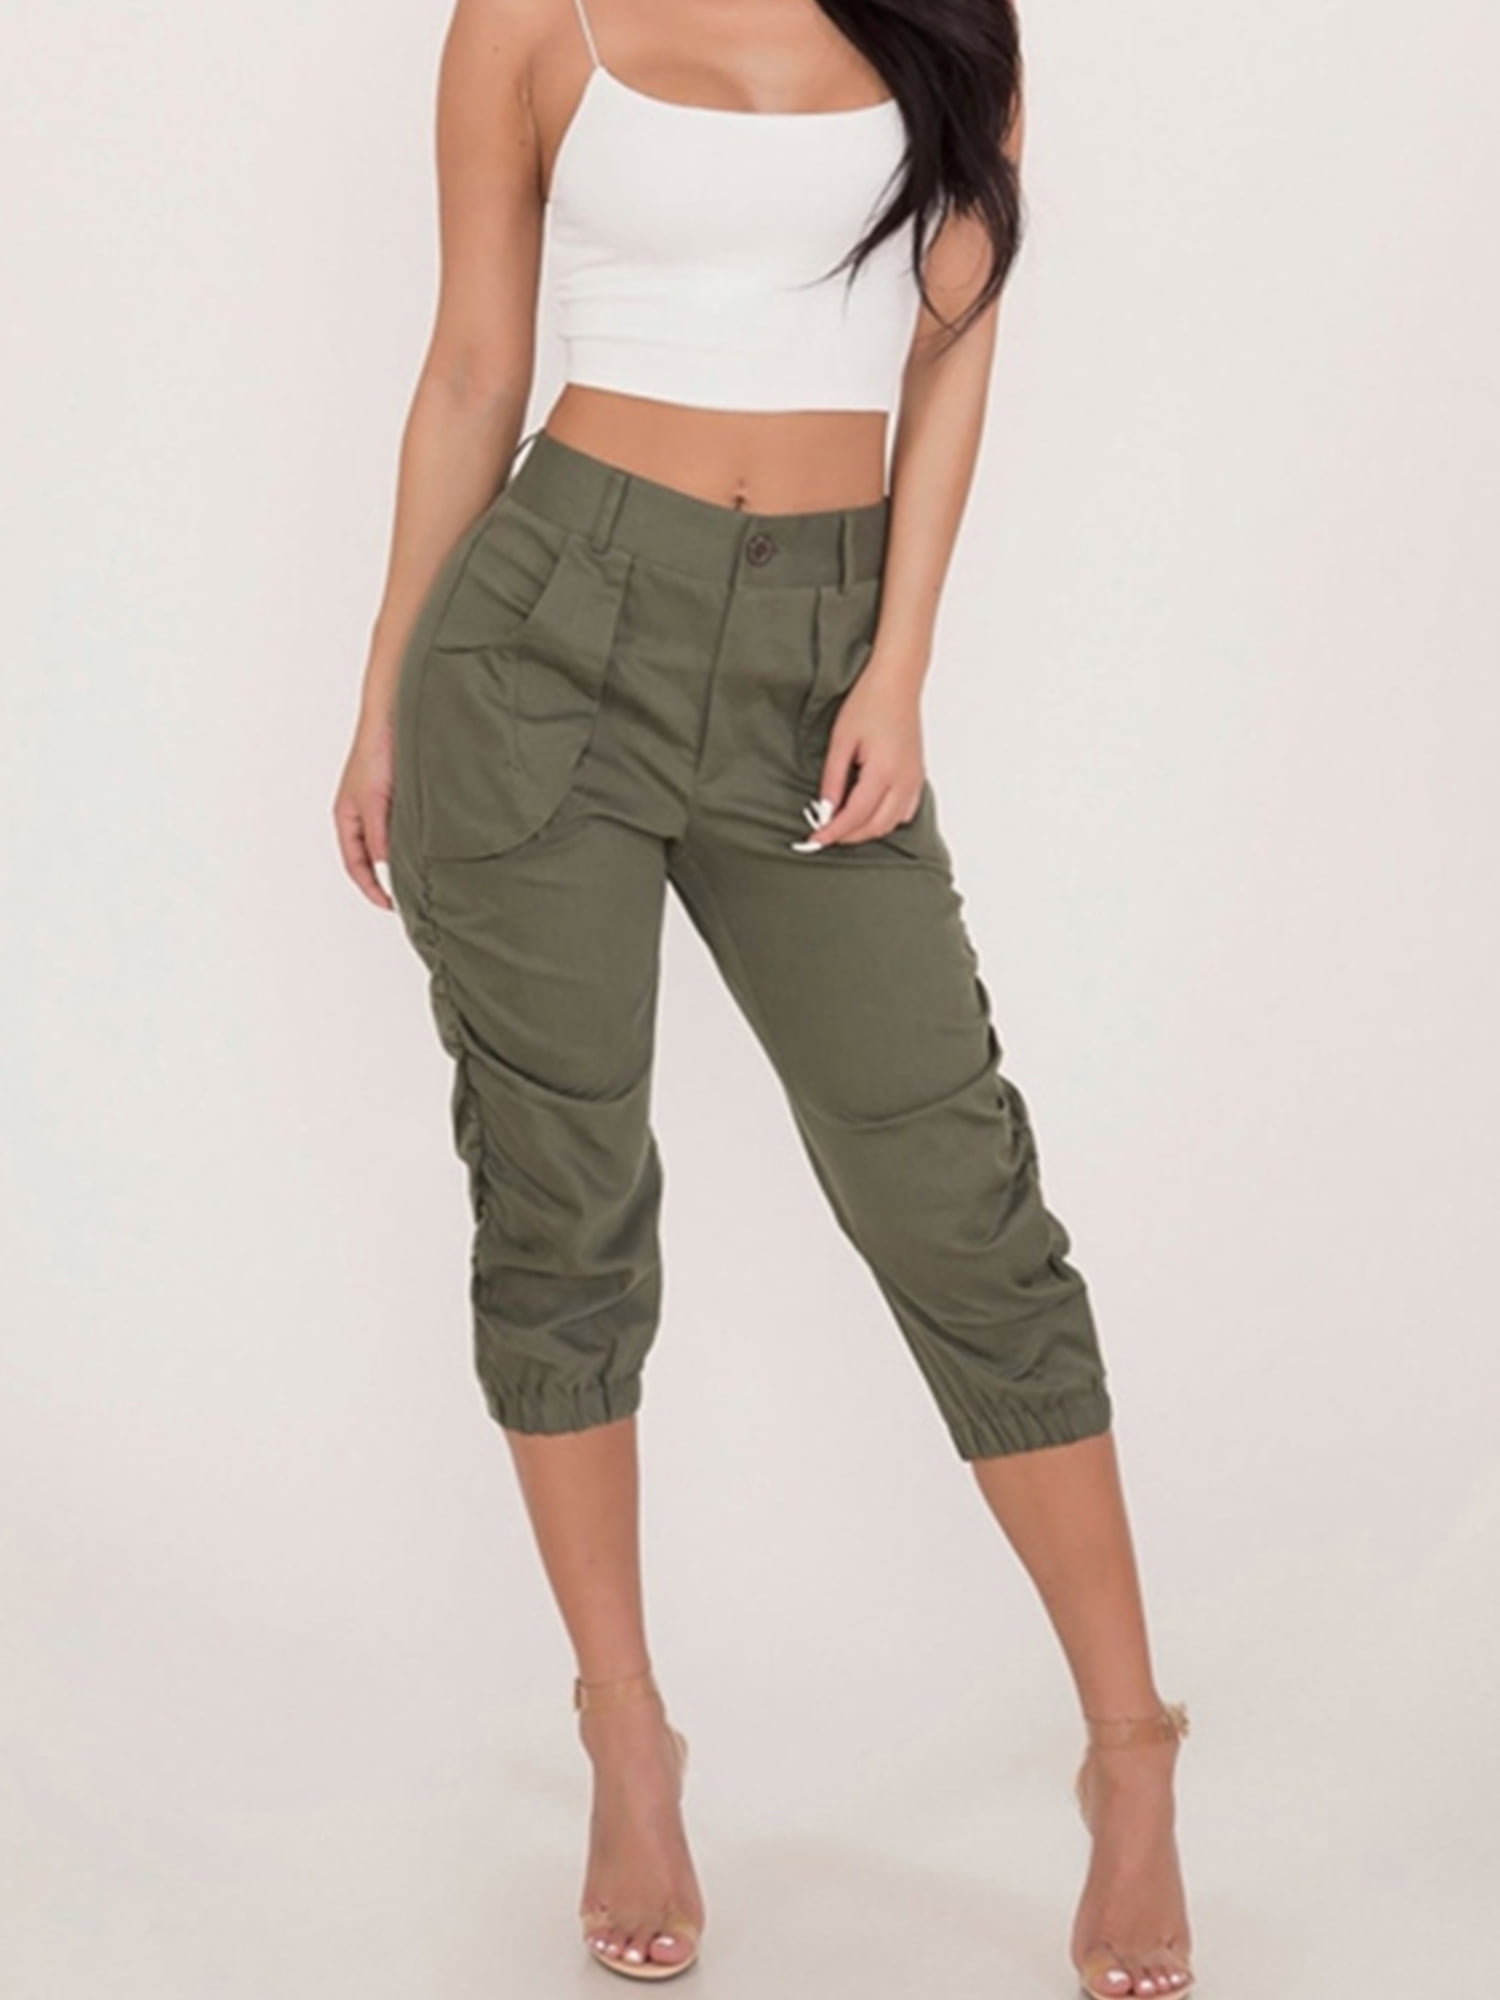 Olive Green Pants Outfit for Different Locations - FashionActivation